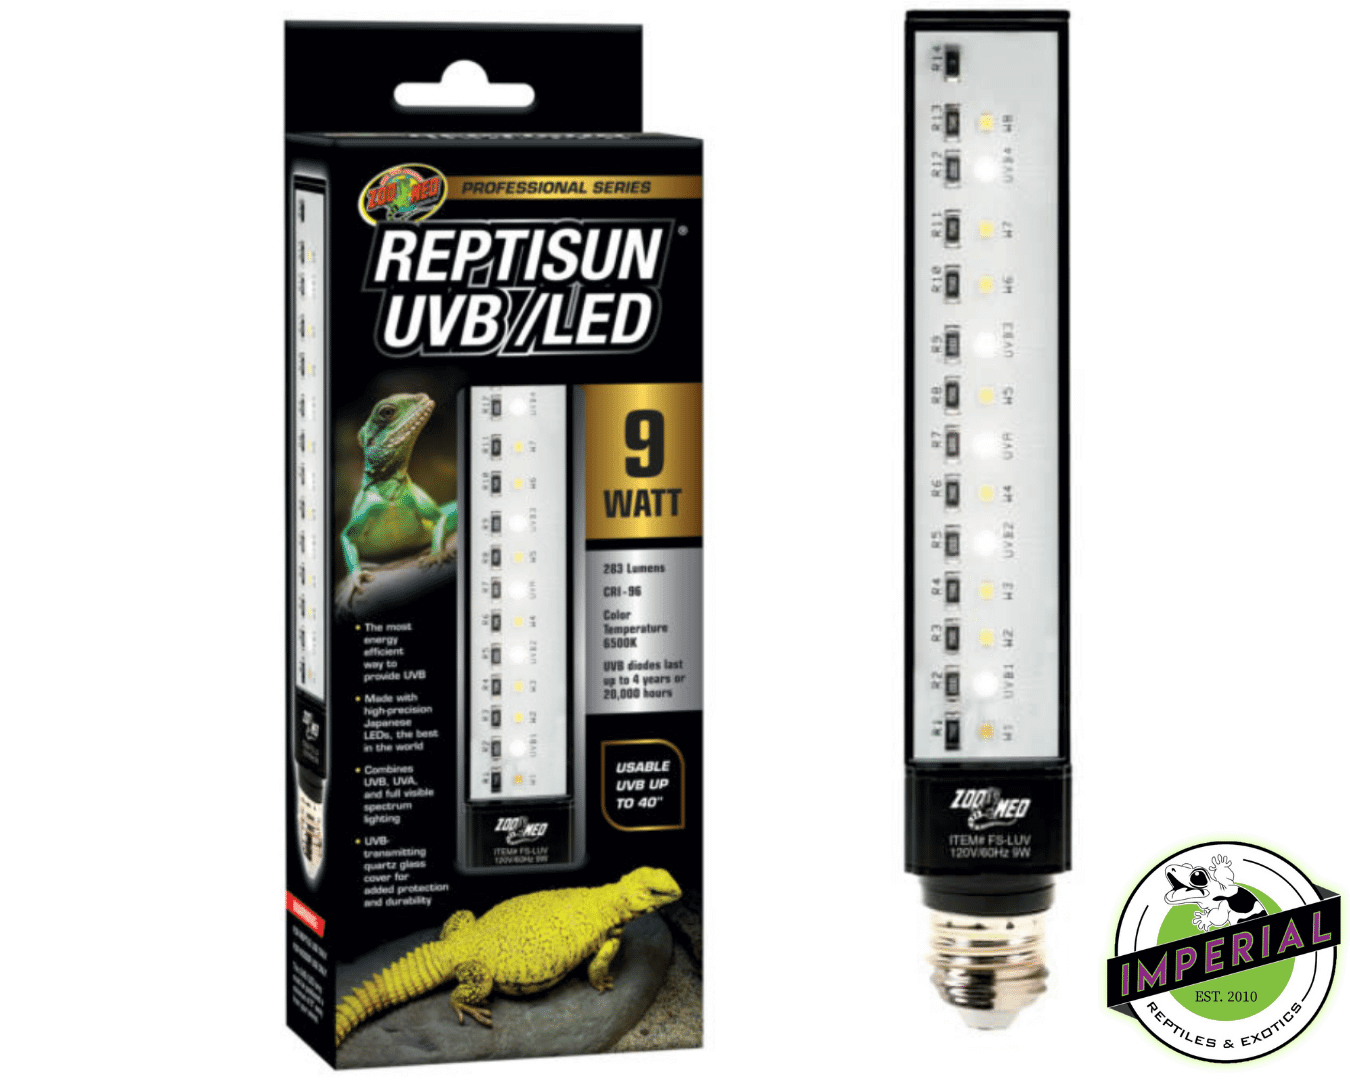 reptile uvb and led bulb for sale online. buy pro series reptiesun uv led bulb at cheap prices near me